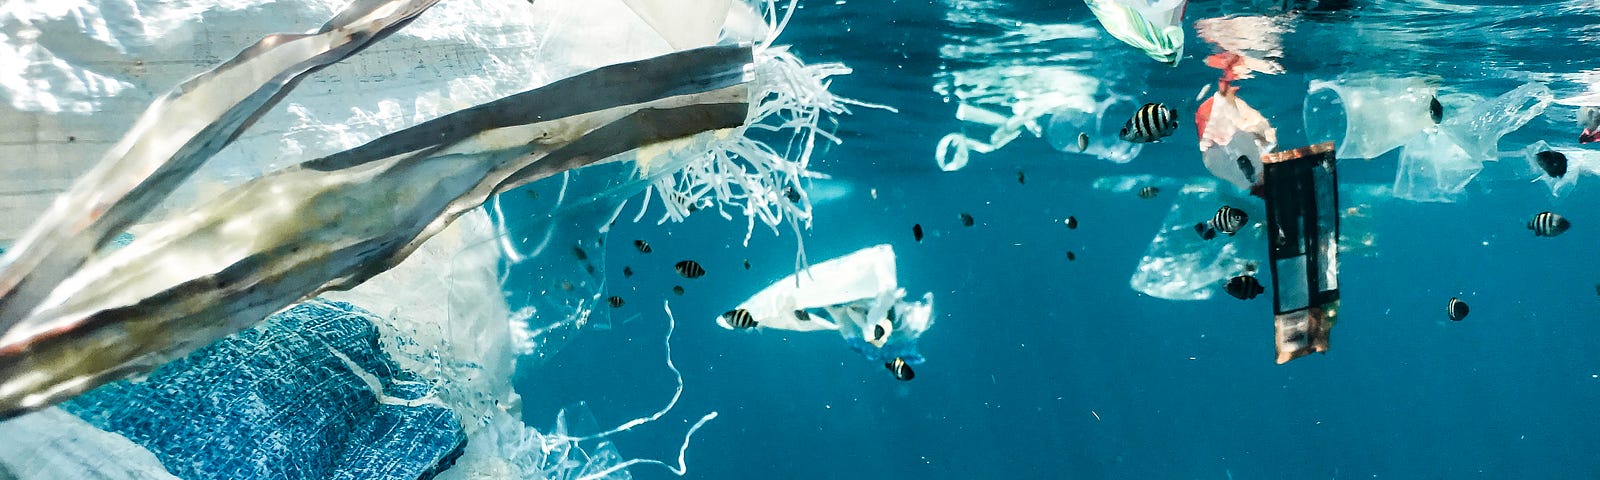 A collection of plastic trash in the ocean.